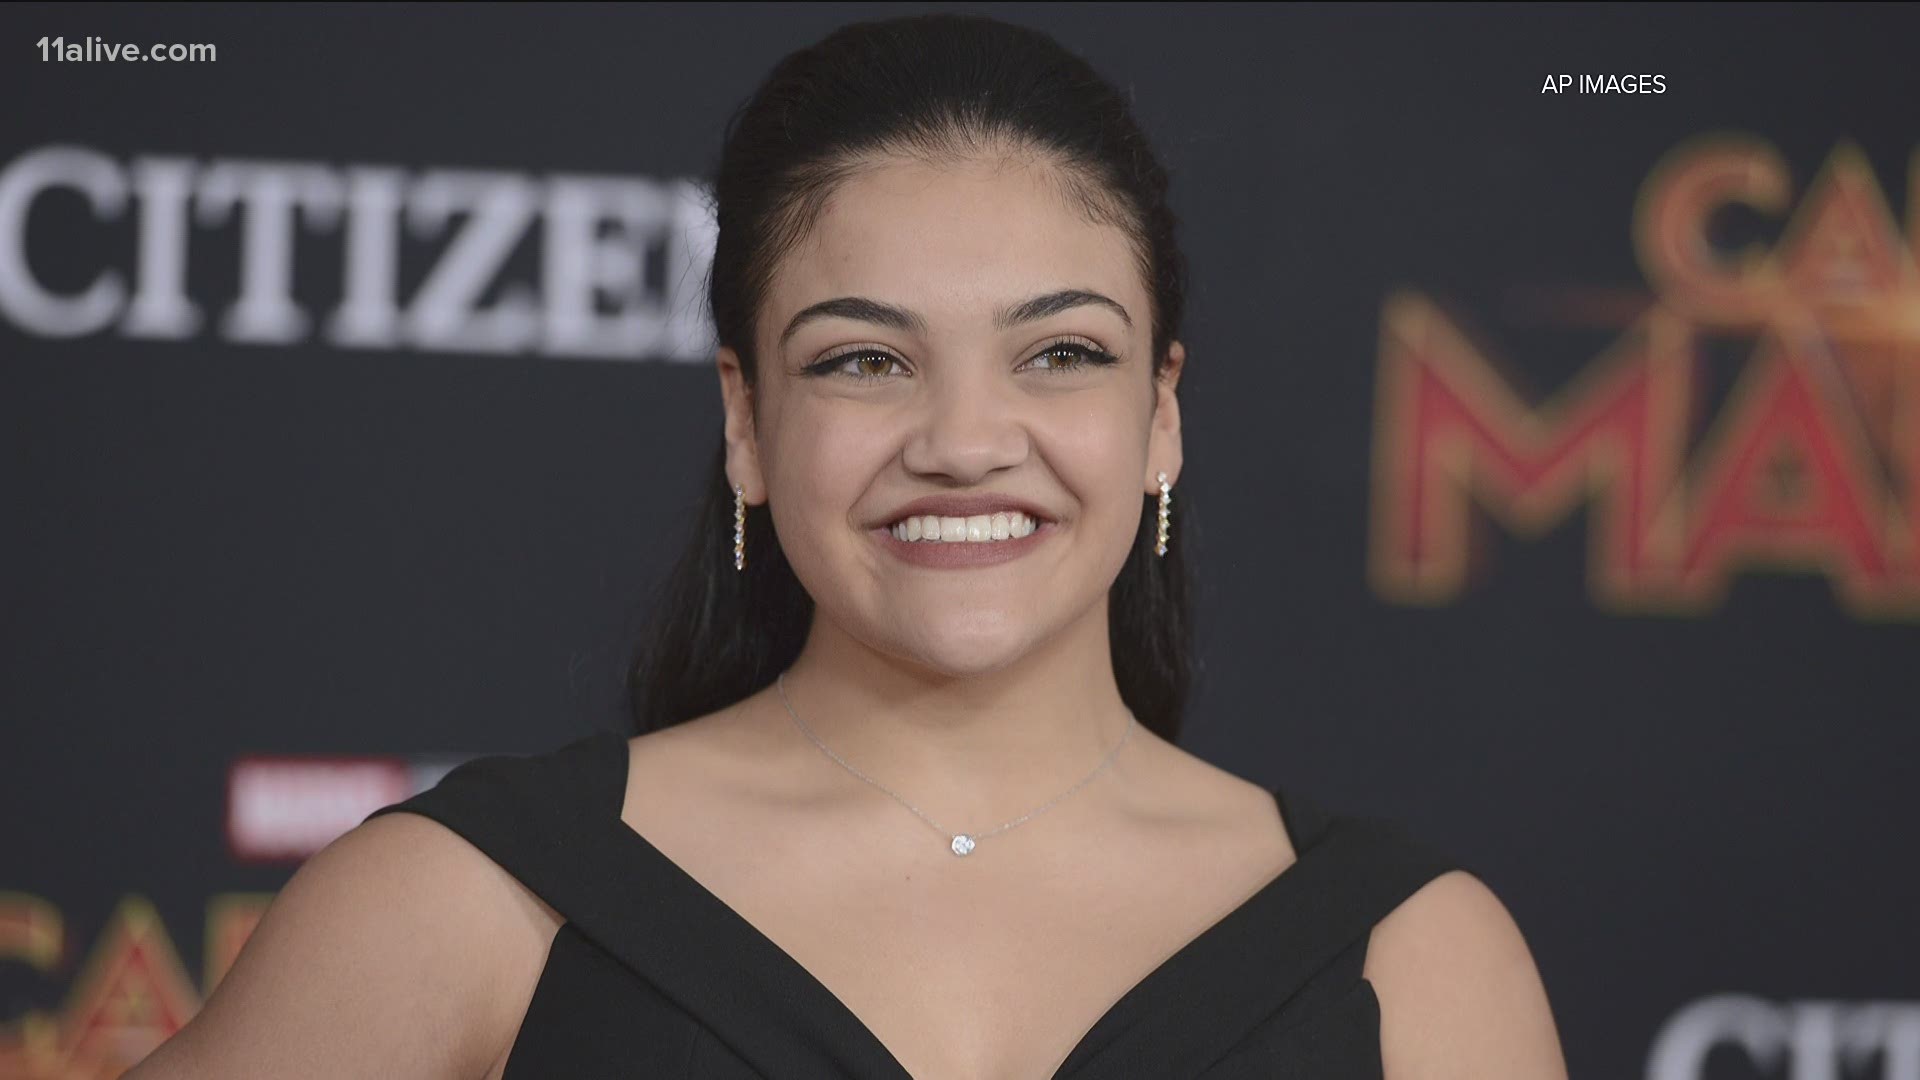 Two time Olympic Medalist Laurie Hernandez will not compete at the US gymnastics trials in two weeks.